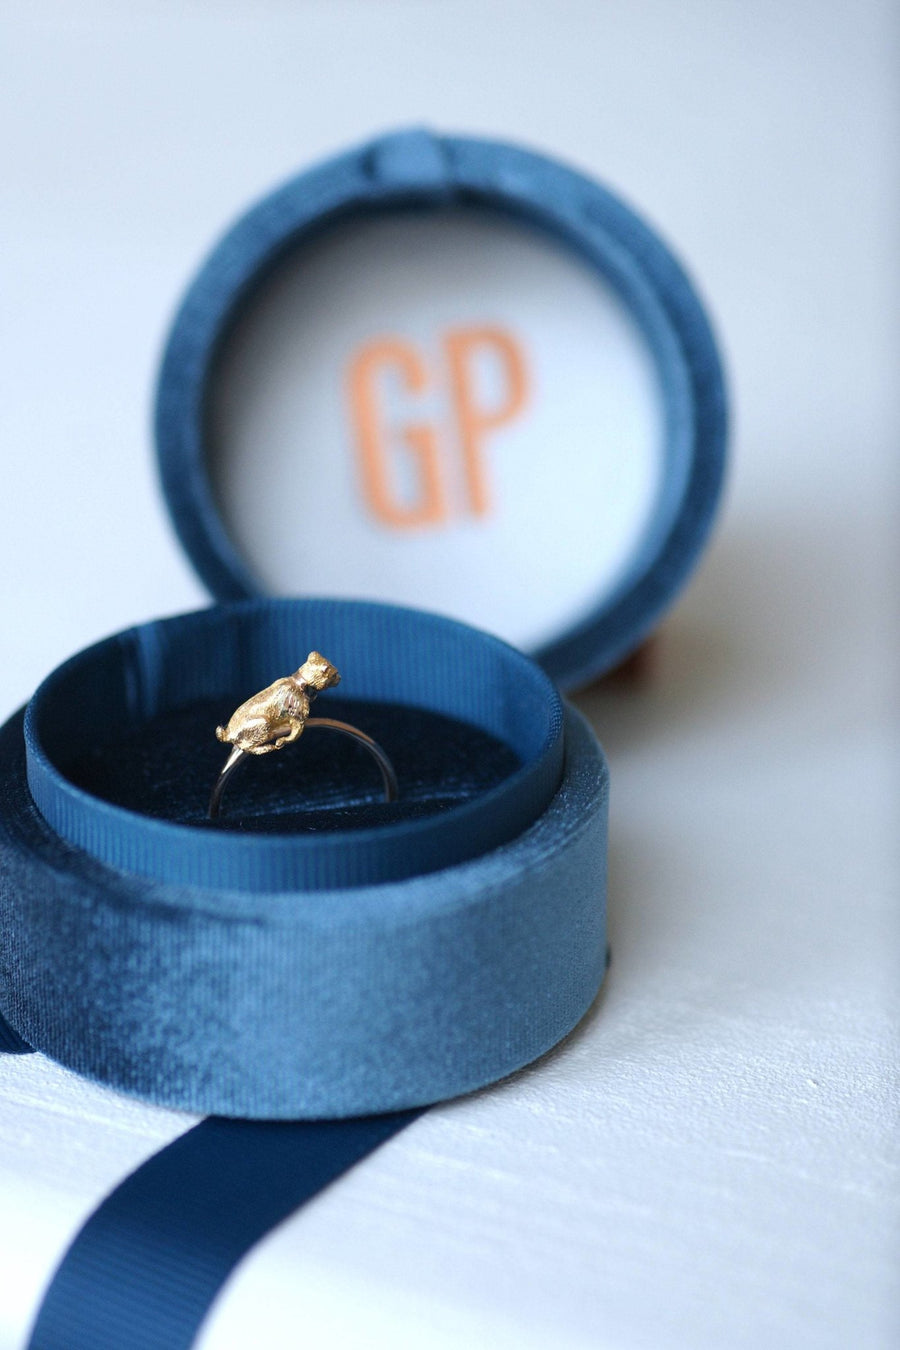 Antique gold dog ring - Penelope Gallery